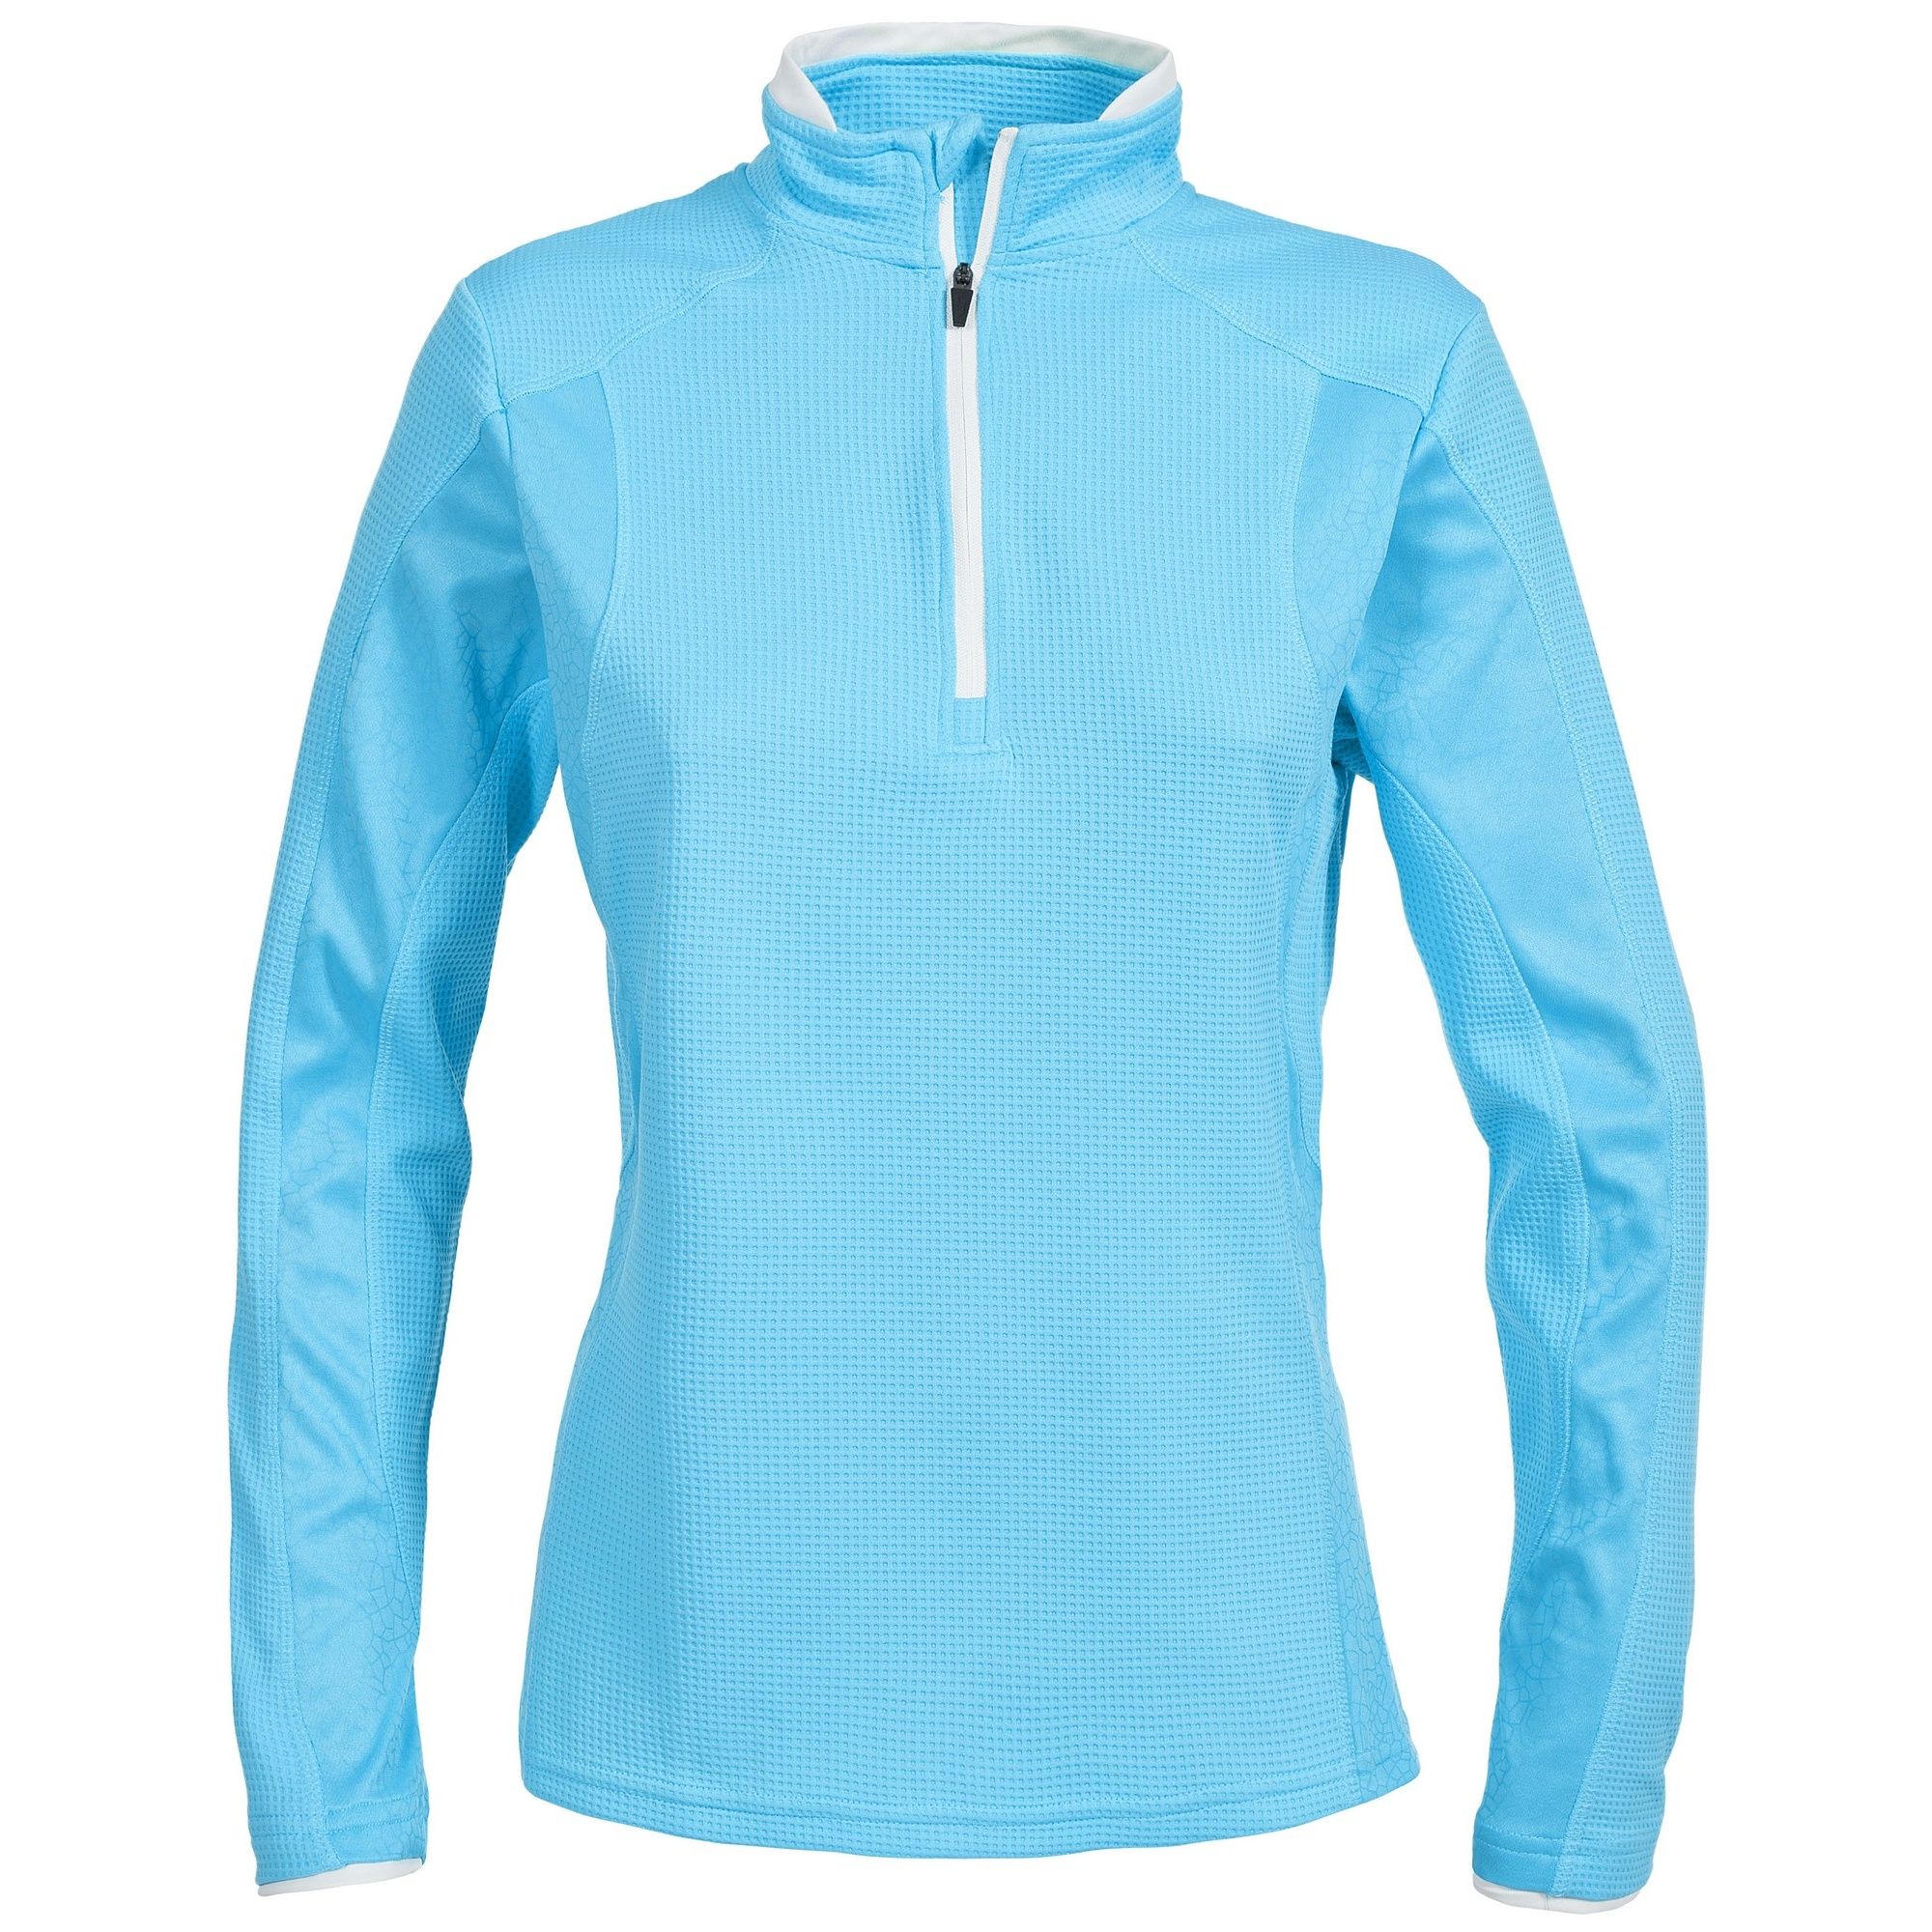 1/2 zip neck. Long sleeves. Contrast printed panels. Reflective prints. Wicking. Quick dry. 100% Polyester. Trespass Womens Chest Sizing (approx): XXS/6 - 31in/78cm, XS/8 - 32in/81cm, S/10 - 34in/86cm, M/12 - 36in/91.4cm, L/14 - 38in/96.5cm, XL/16 - 40in/101.5cm, XXL/18 - 42in/106.5cm.